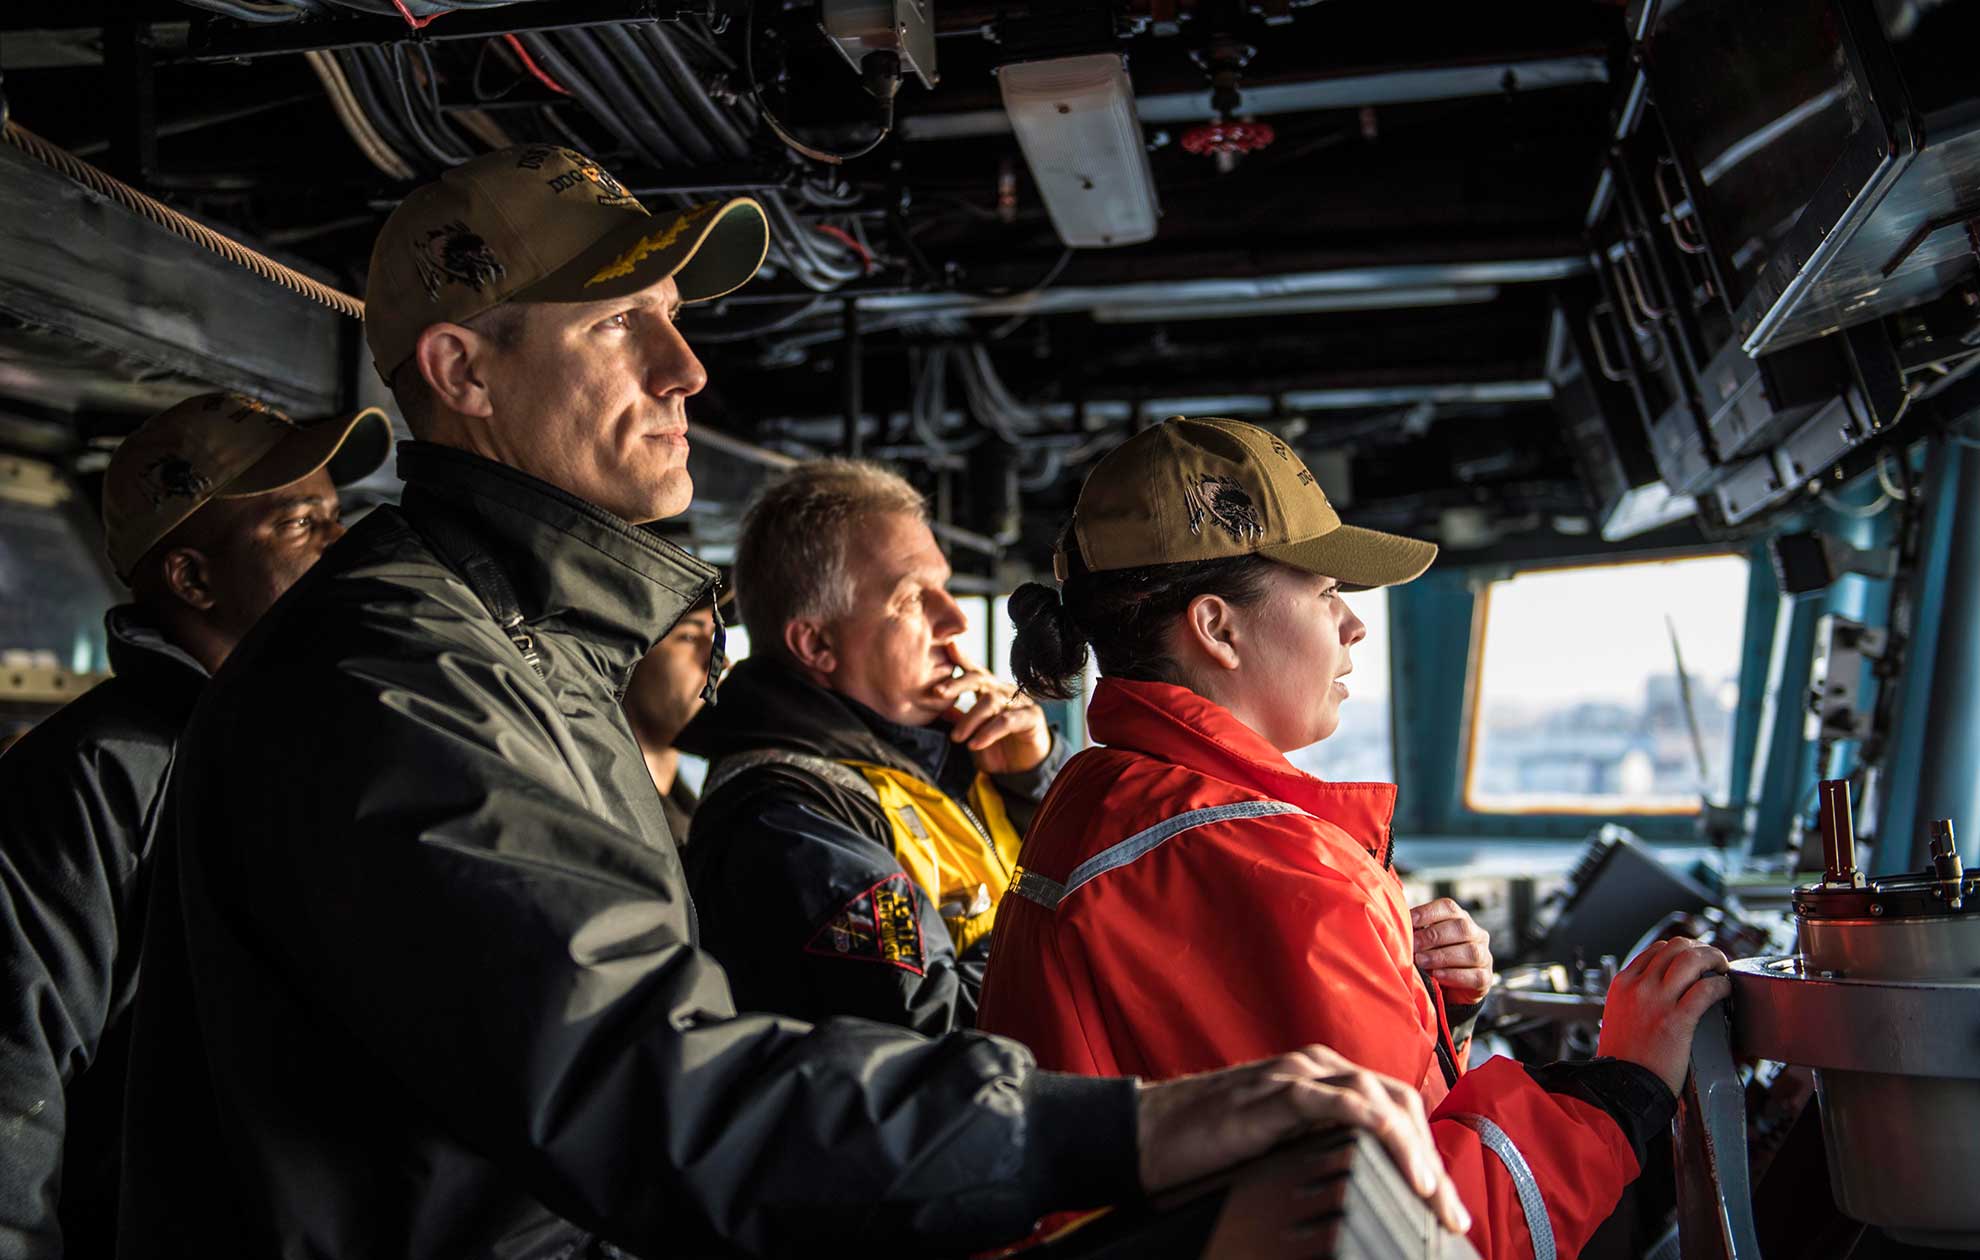 Plymouth, England (Feb. 11, 2019) Cmdr. Craig Trent, left, commanding officer of the Arleigh Burke-class guided-missile destroyer USS Porter (DDG 78), observes from the bridge as the ship departs Plymouth, England, Feb. 11, 2019. Porter, forward-deployed to Rota, Spain, is on its sixth patrol in the U.S. 6th Fleet area of operations in support of U.S national security interests in Europe and Africa -- U.S. Navy photo by MCS2 James R. Turner. -